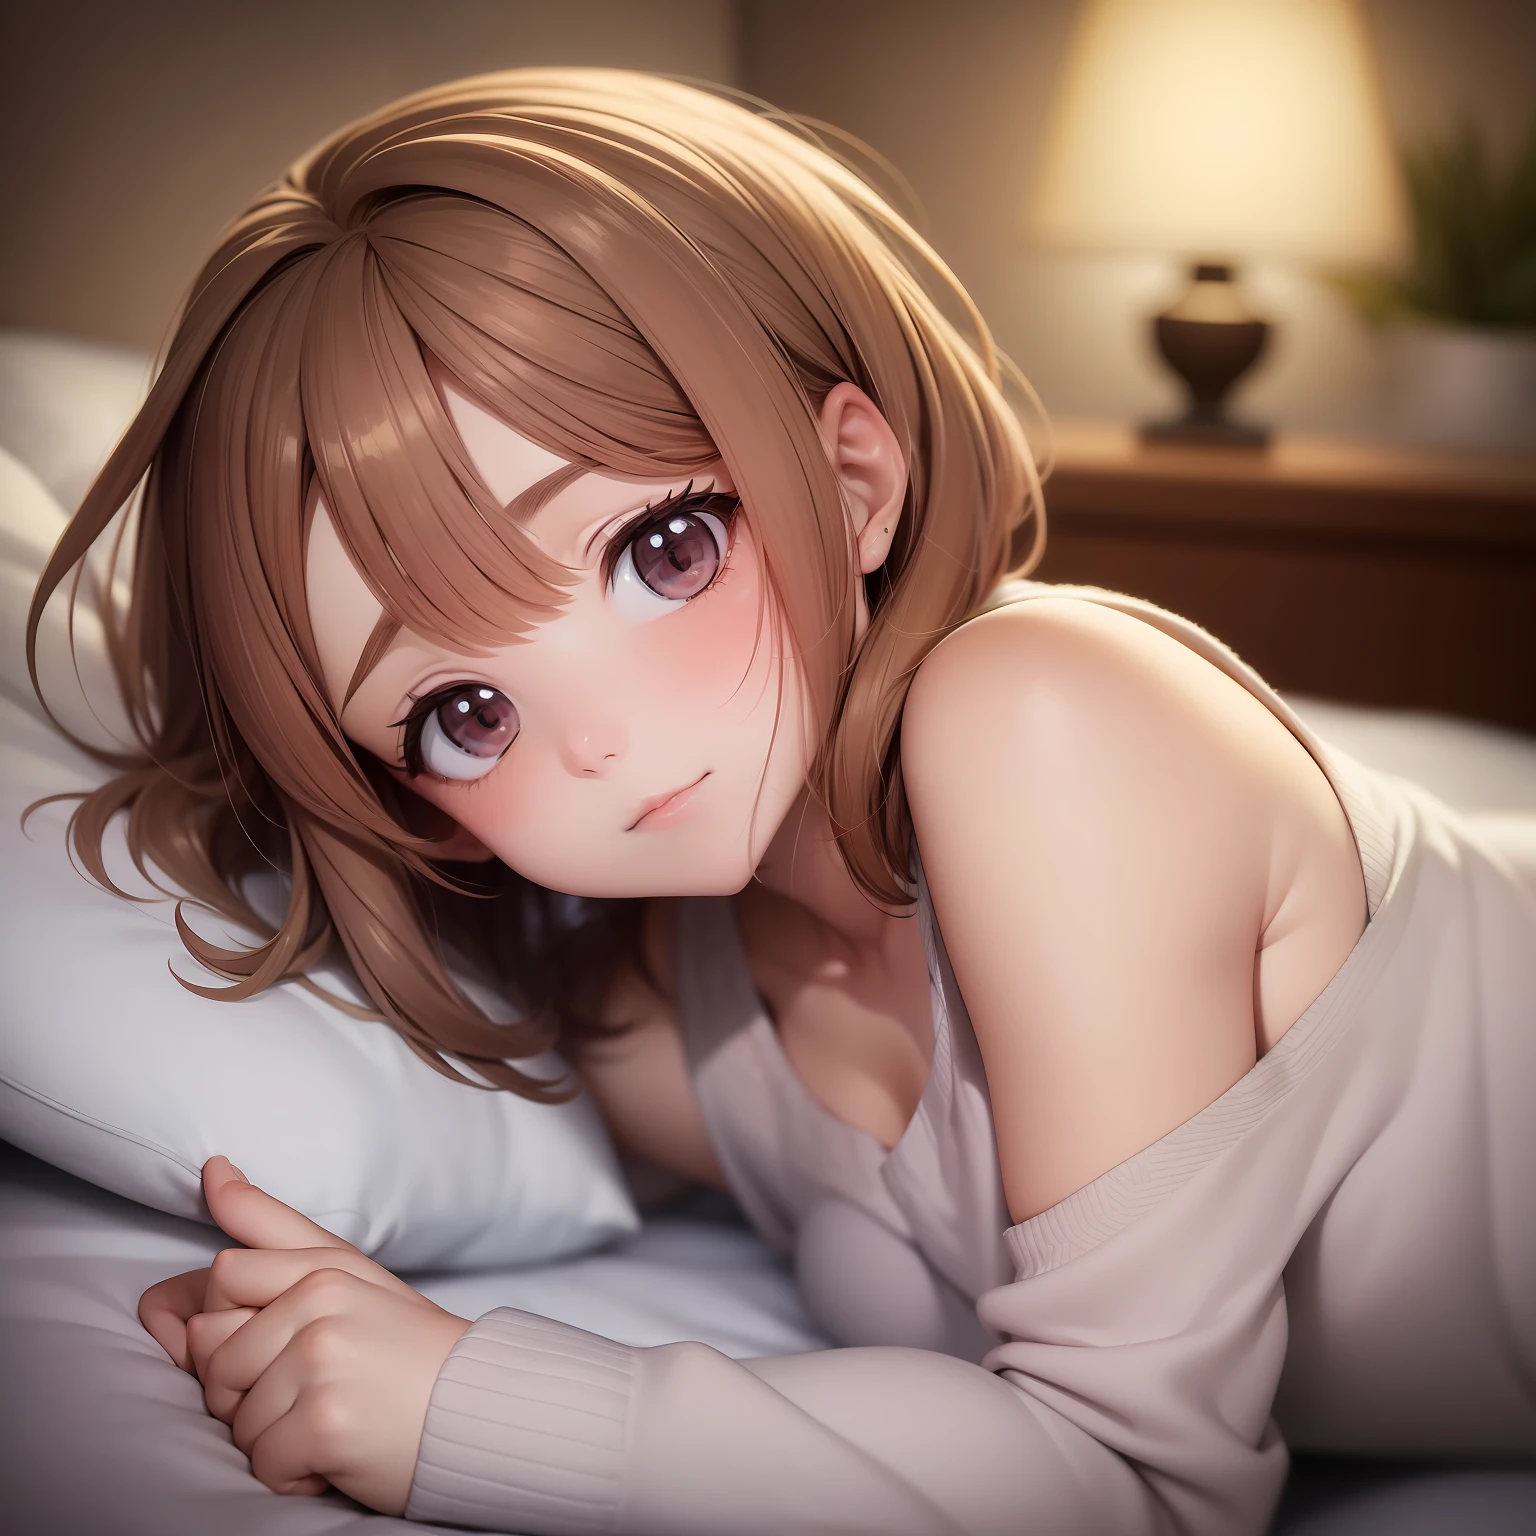 ochako uraraka resting in a cozy bed, covered with a soft blanket, Impeccable artistic style, highest qualityr, warm lighting, Calm expression.